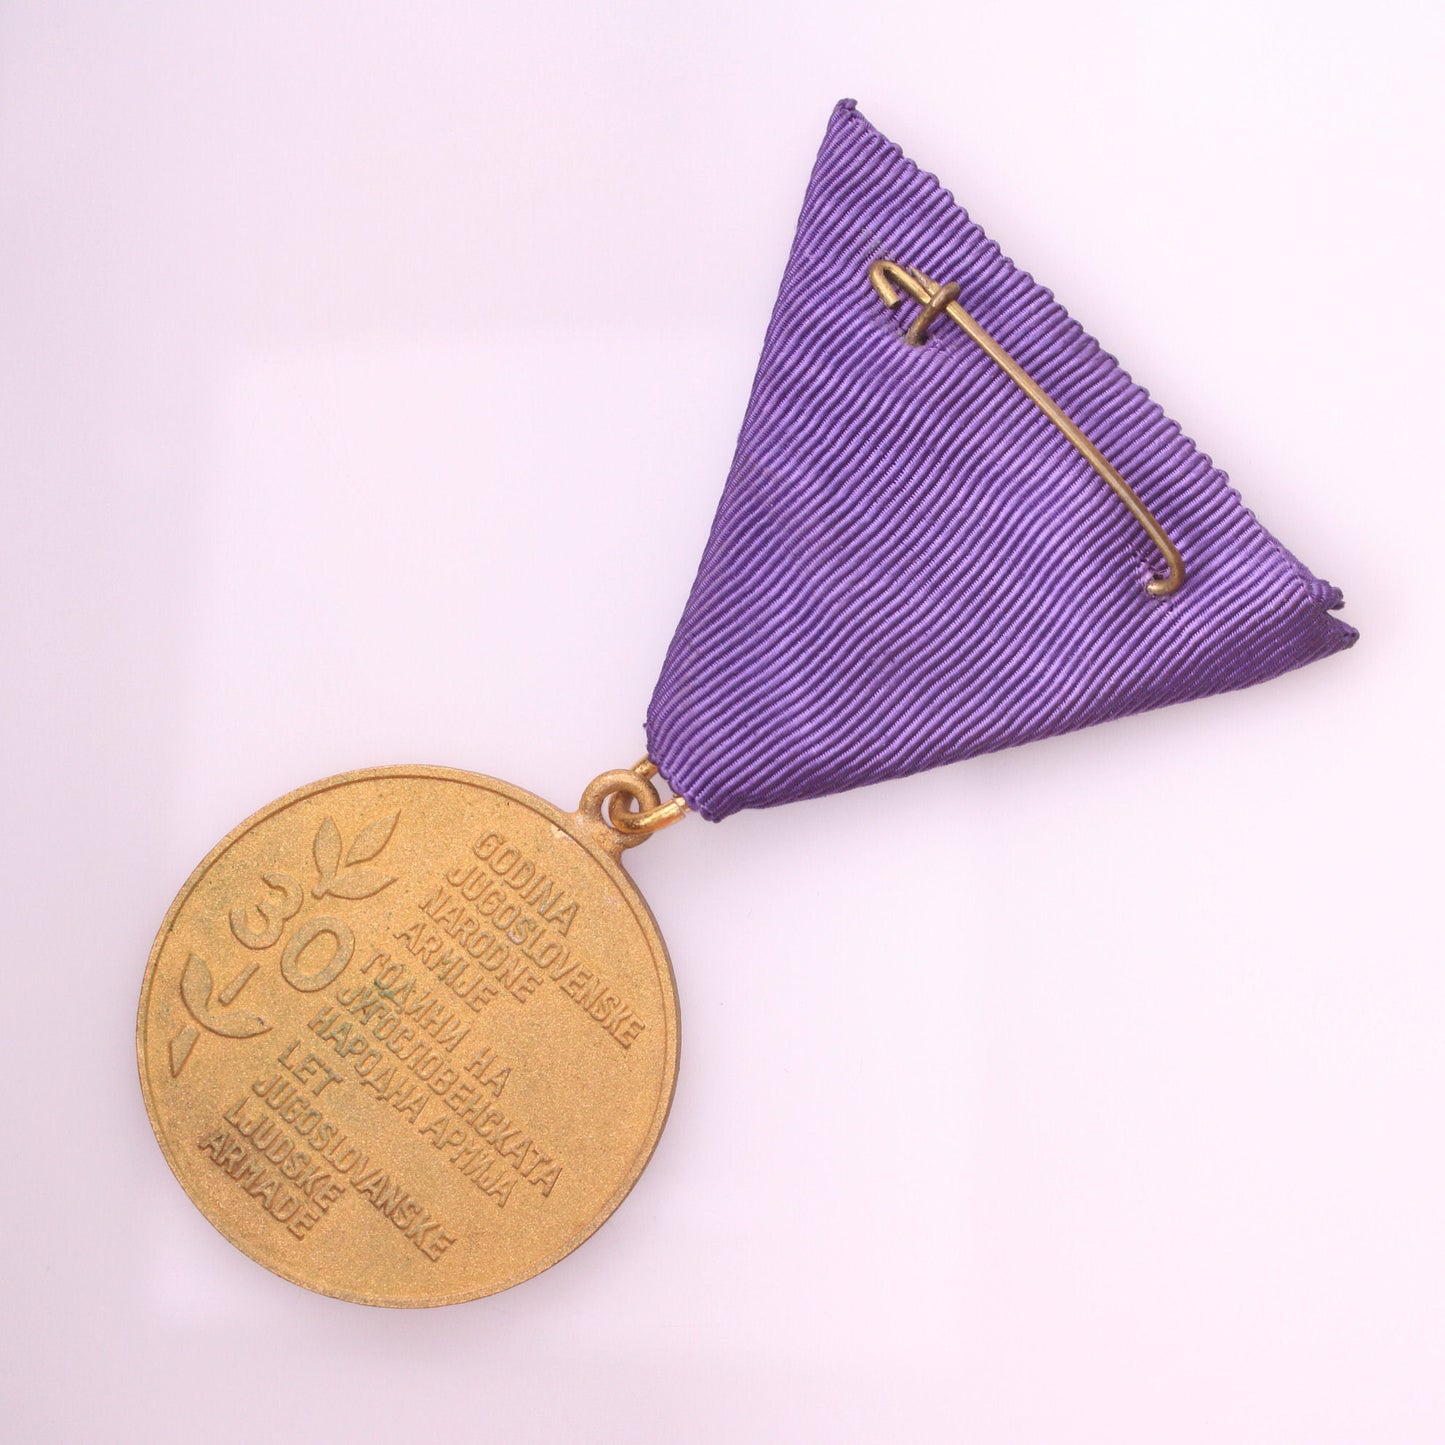 YUGOSLAVIA 30th Anniversary of Peoples' Army Medal